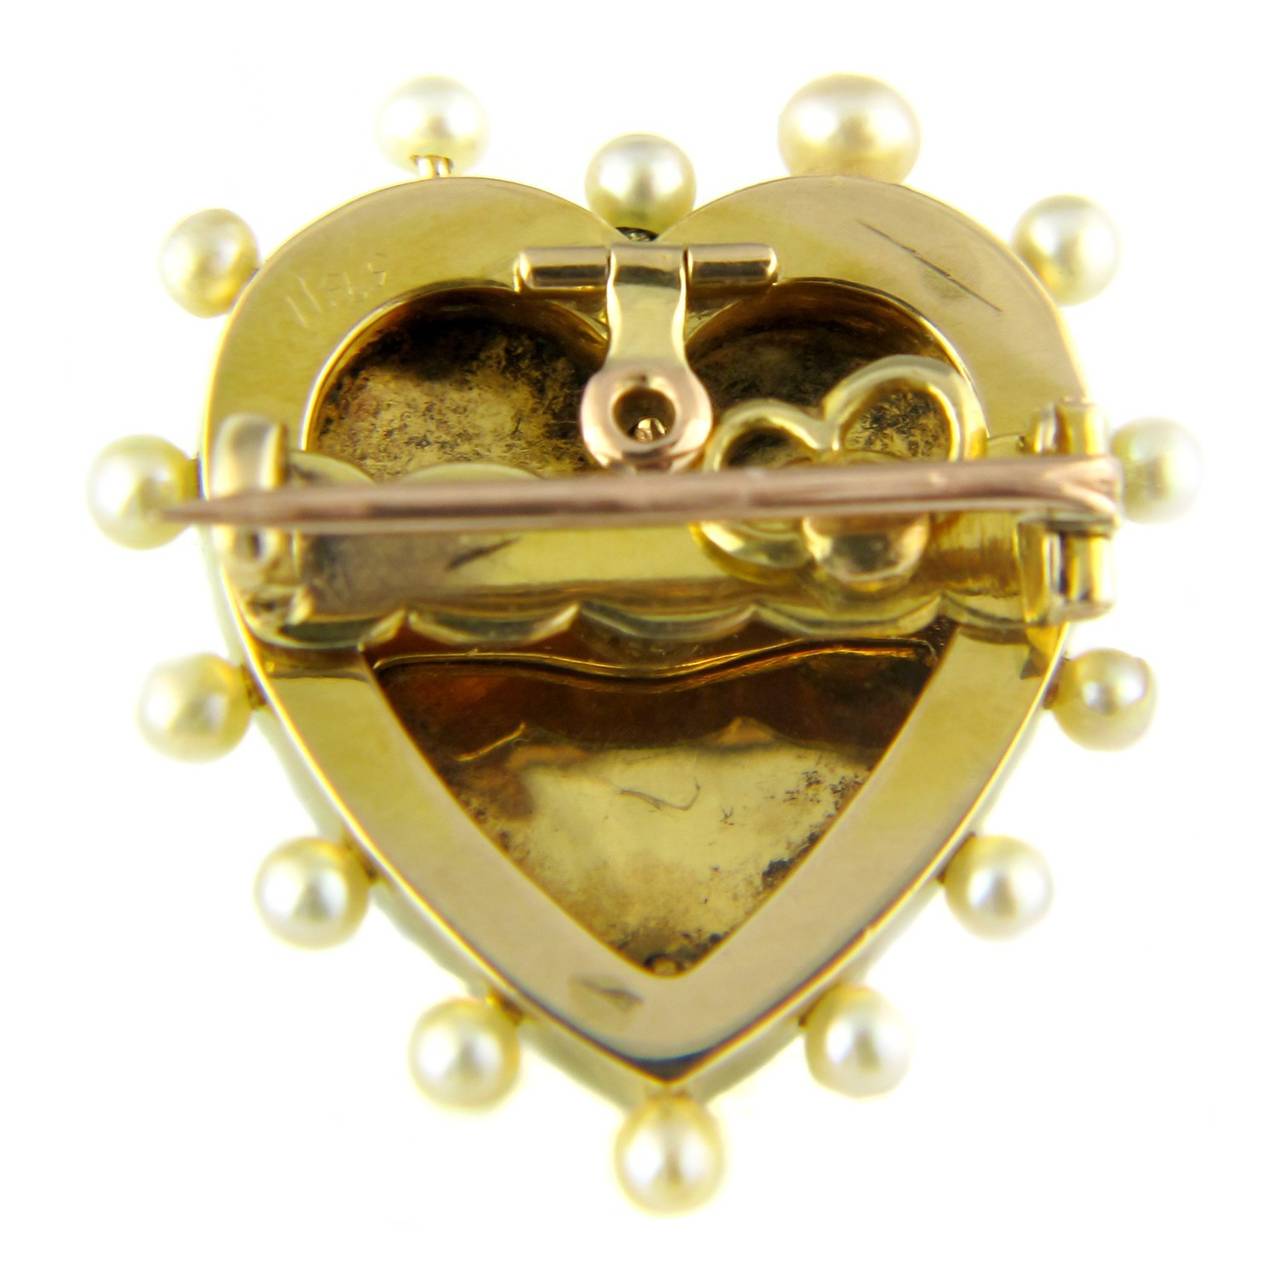 A Victorian heart pendant/brooch, comprising a central rose cut diamond and natural pearl double heart centre, mounted on a white and red guilloche enamel heart with pearl edging, mounted in 15ct gold and silver.

This piece has been fitted with a